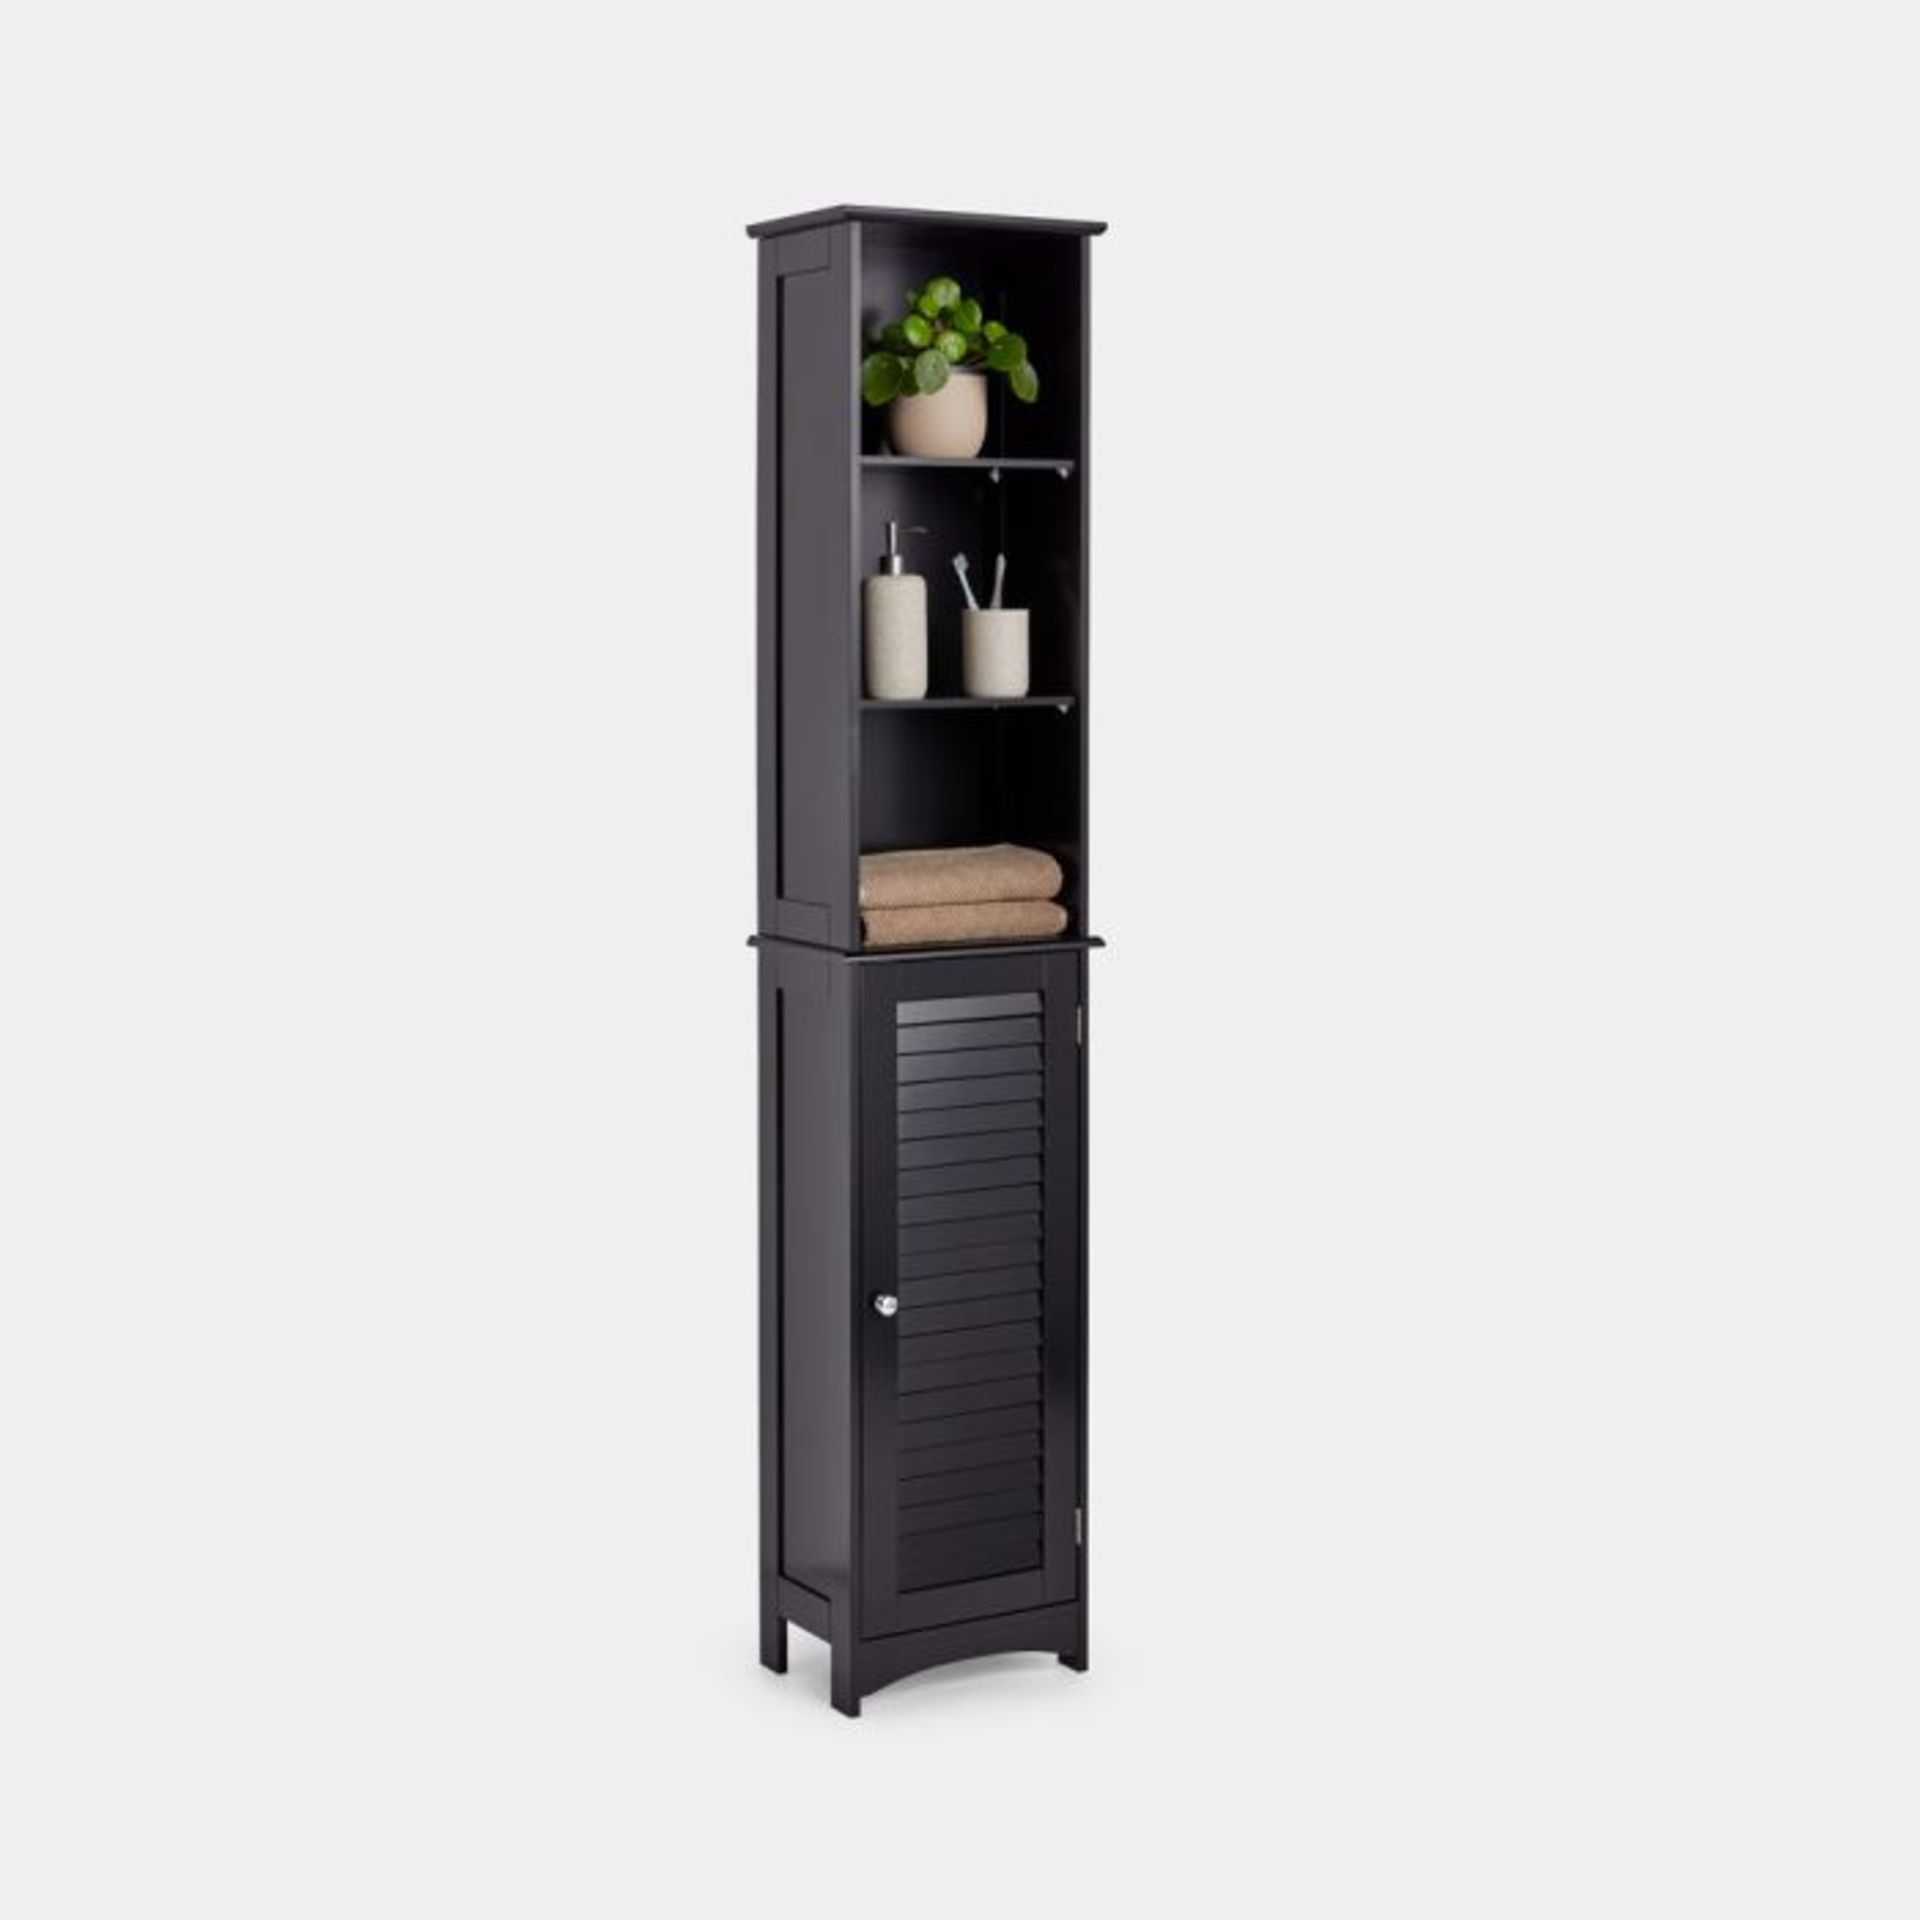 Shrewsbury Tallboy Bathroom Cabinet. - ER43. Adjustable shelving allows you to fully personalise the